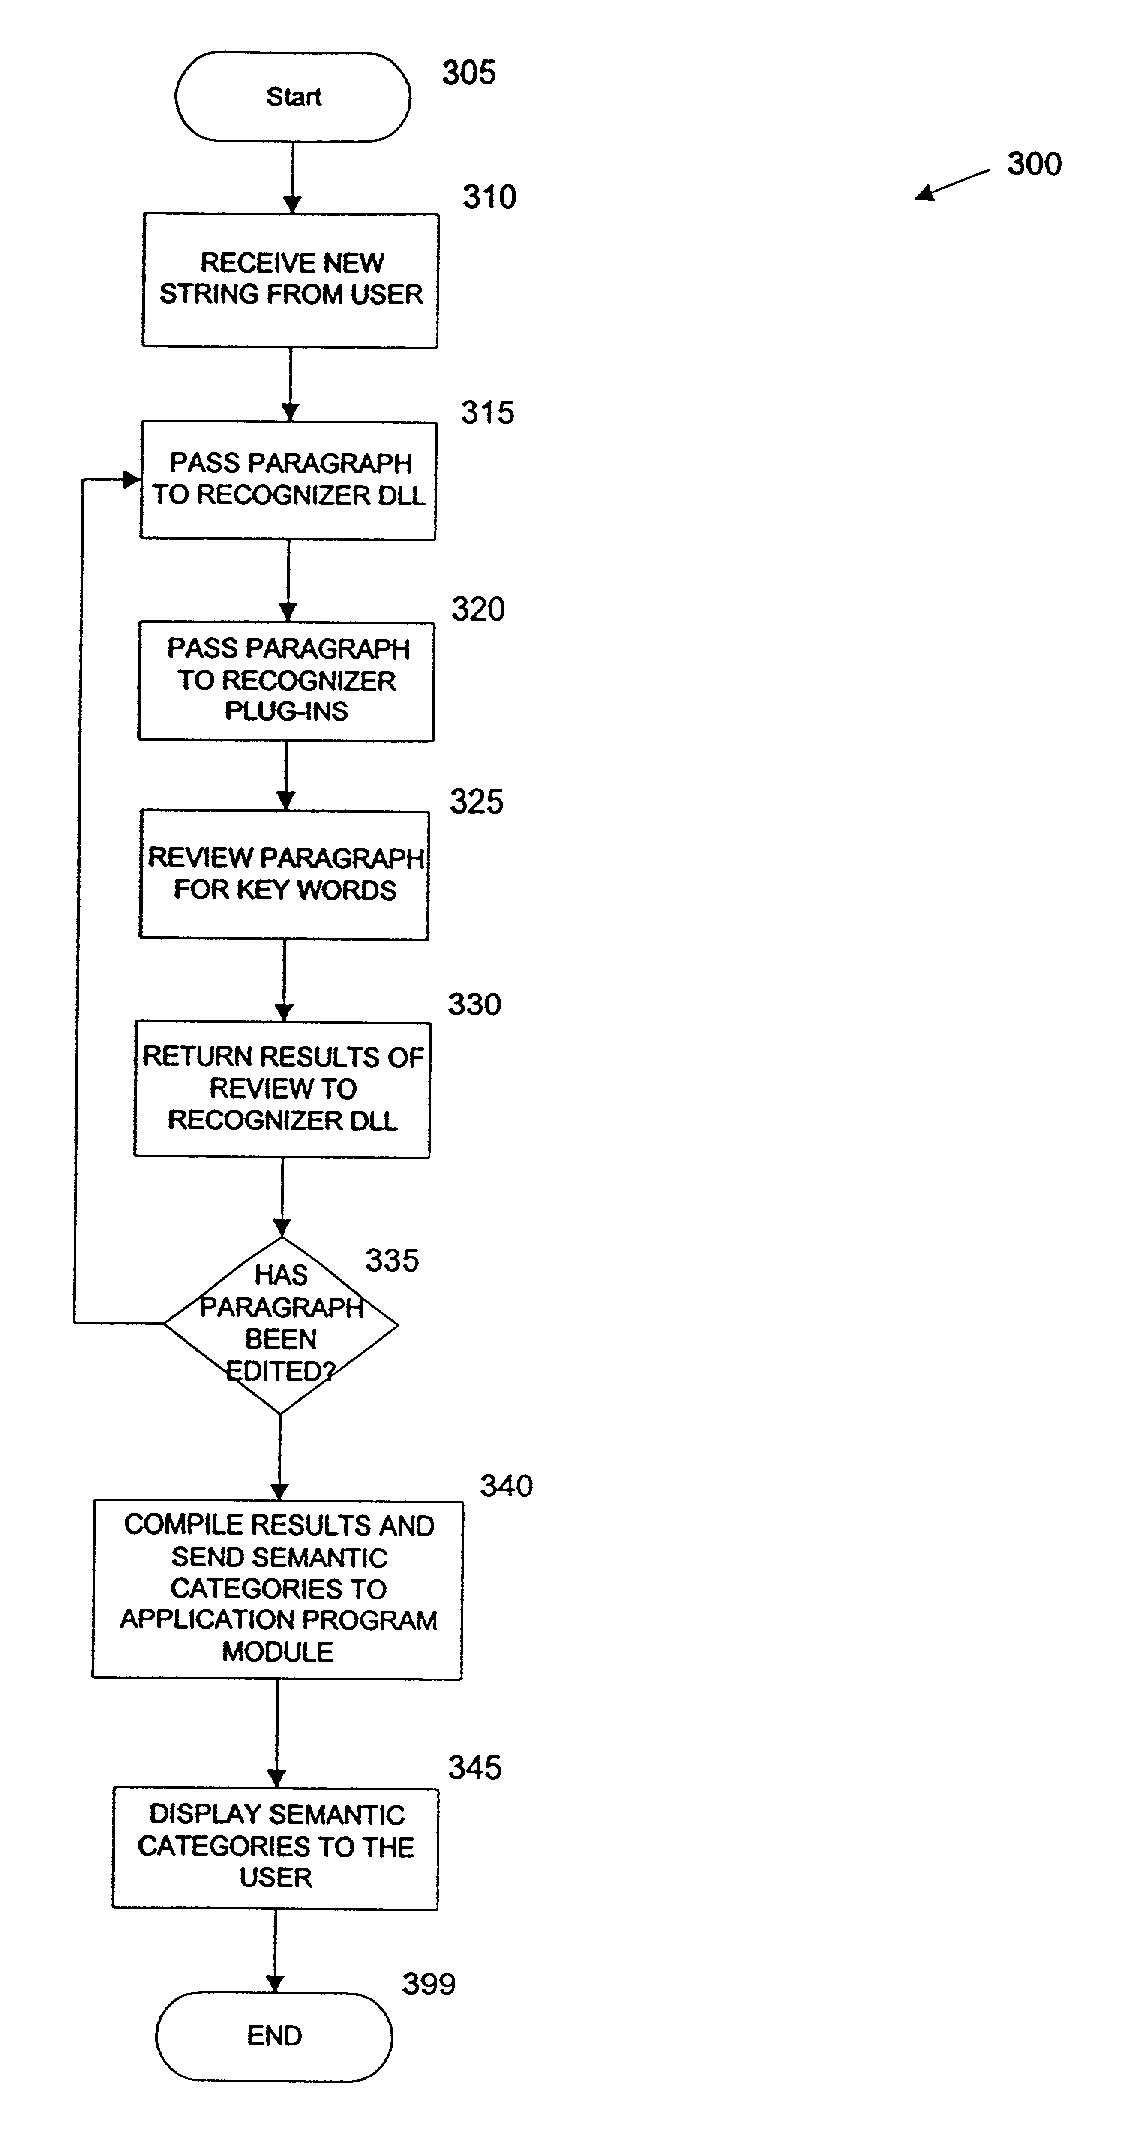 Method and system for providing electronic commerce actions based on semantically labeled strings